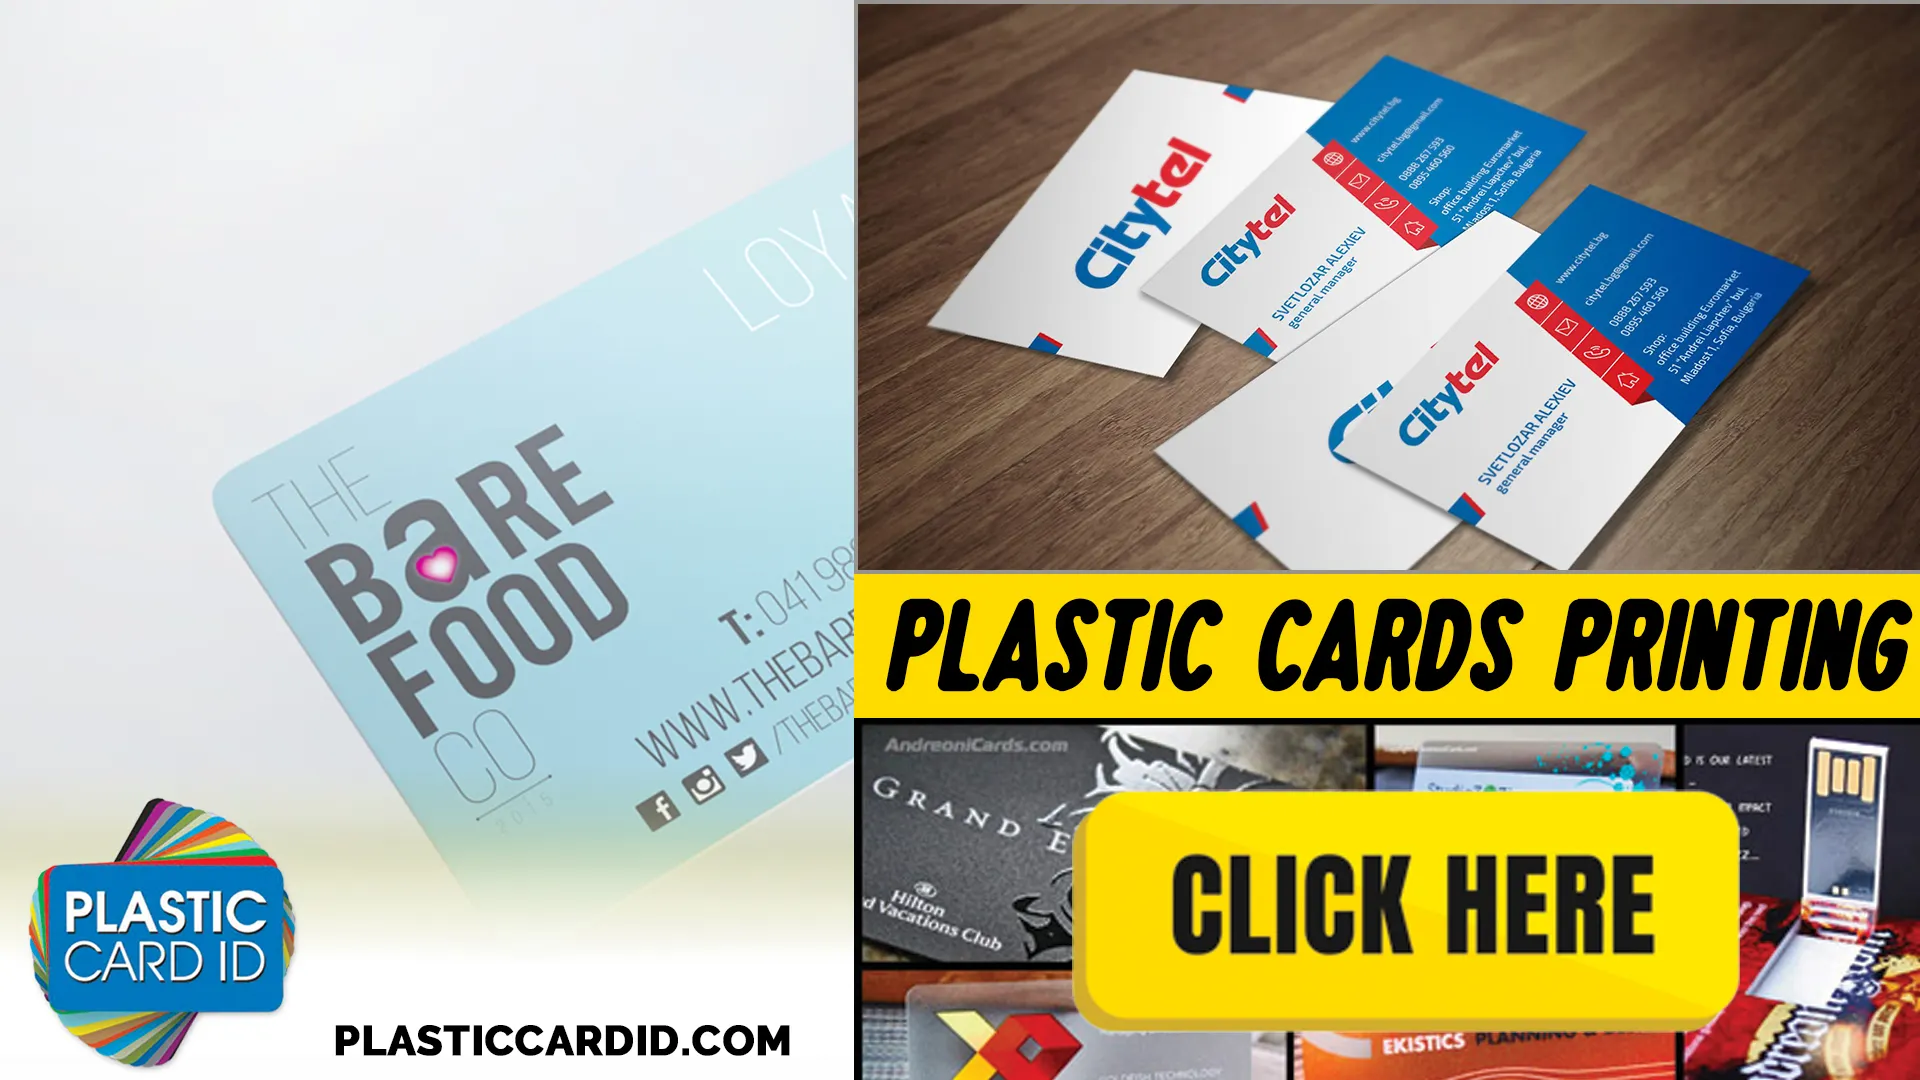 Welcome to Plastic Card ID
: Your Source for High-Quality Plastic Key Tag Materials